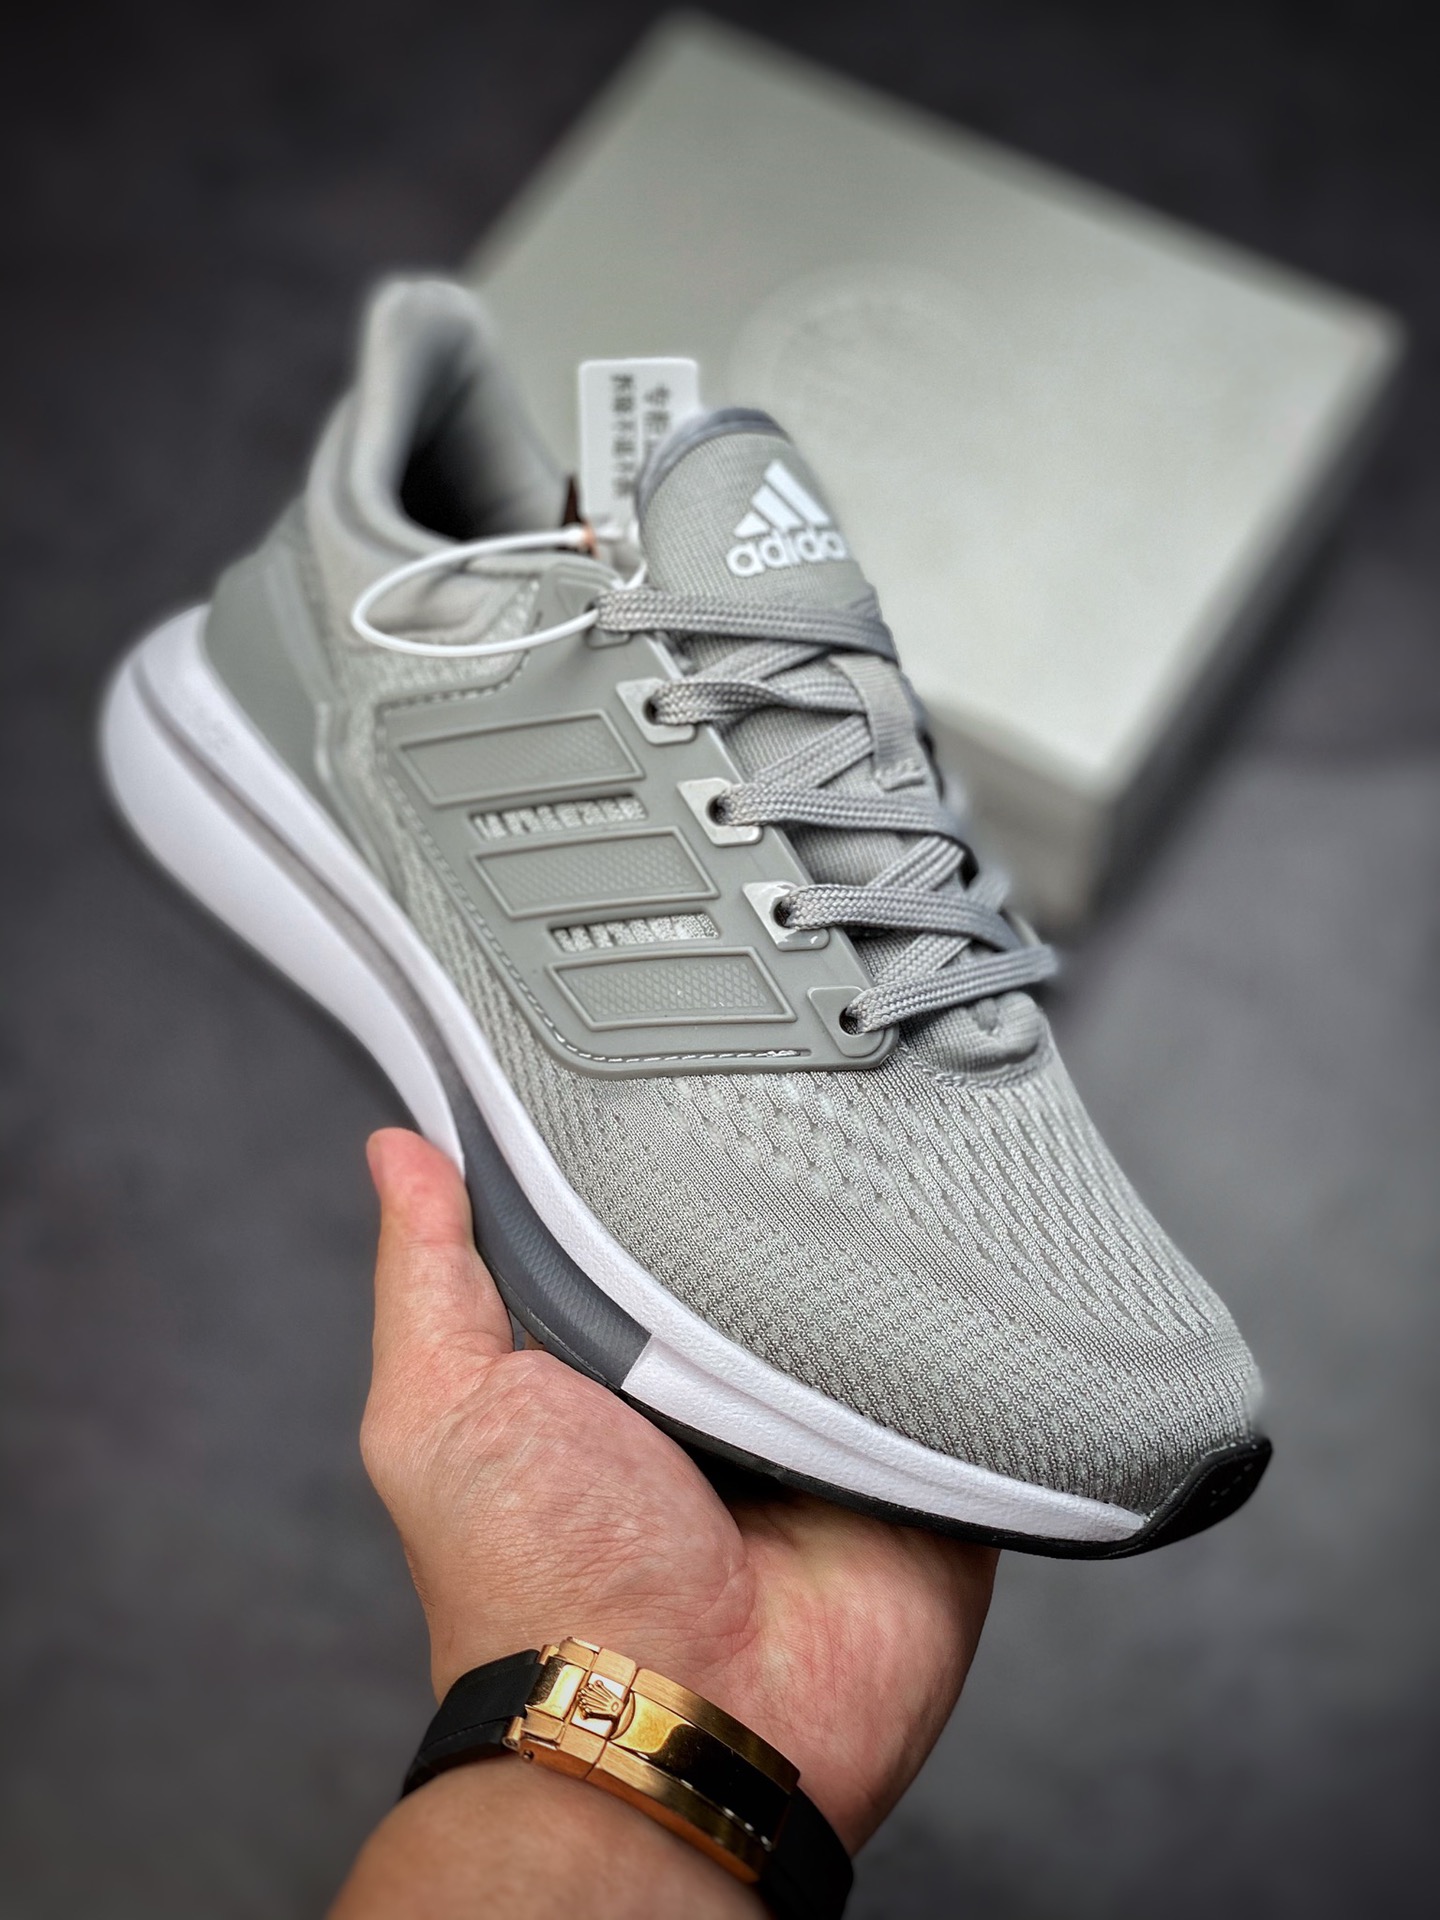 Adidas Adidas EQ21 RUN Officially Launched Retro Running Shoes H00519